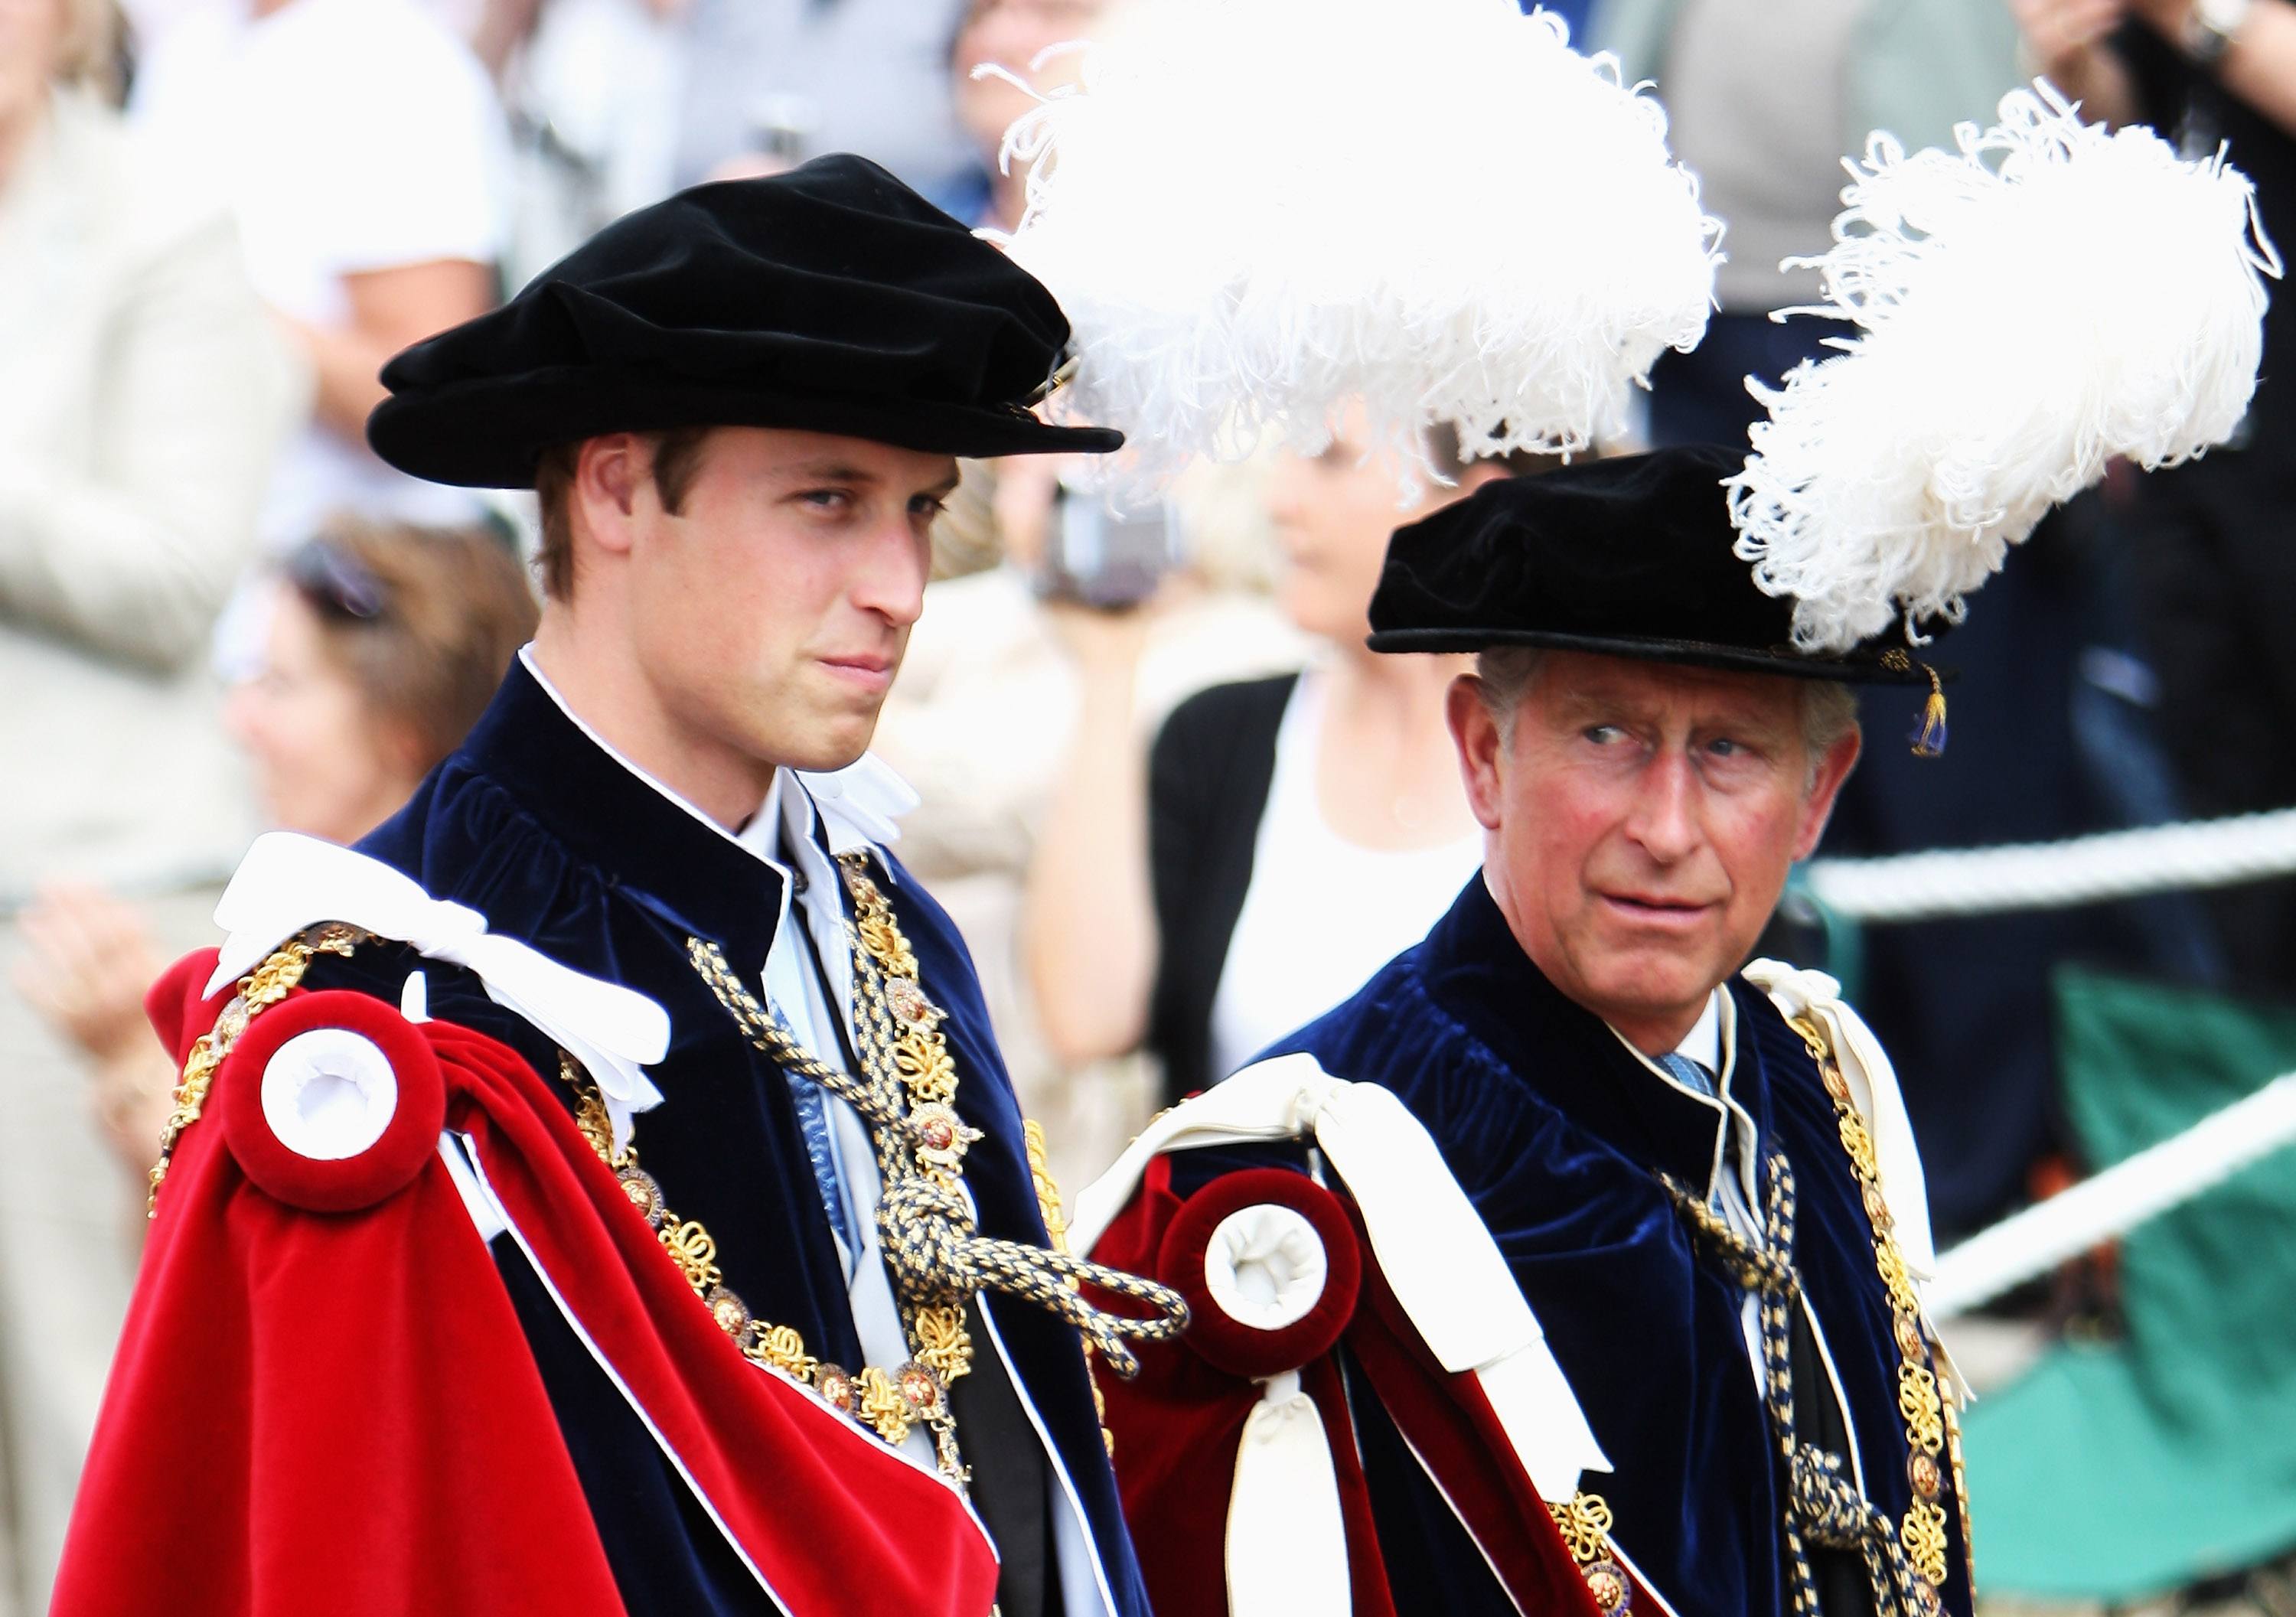 Princes William and Charles